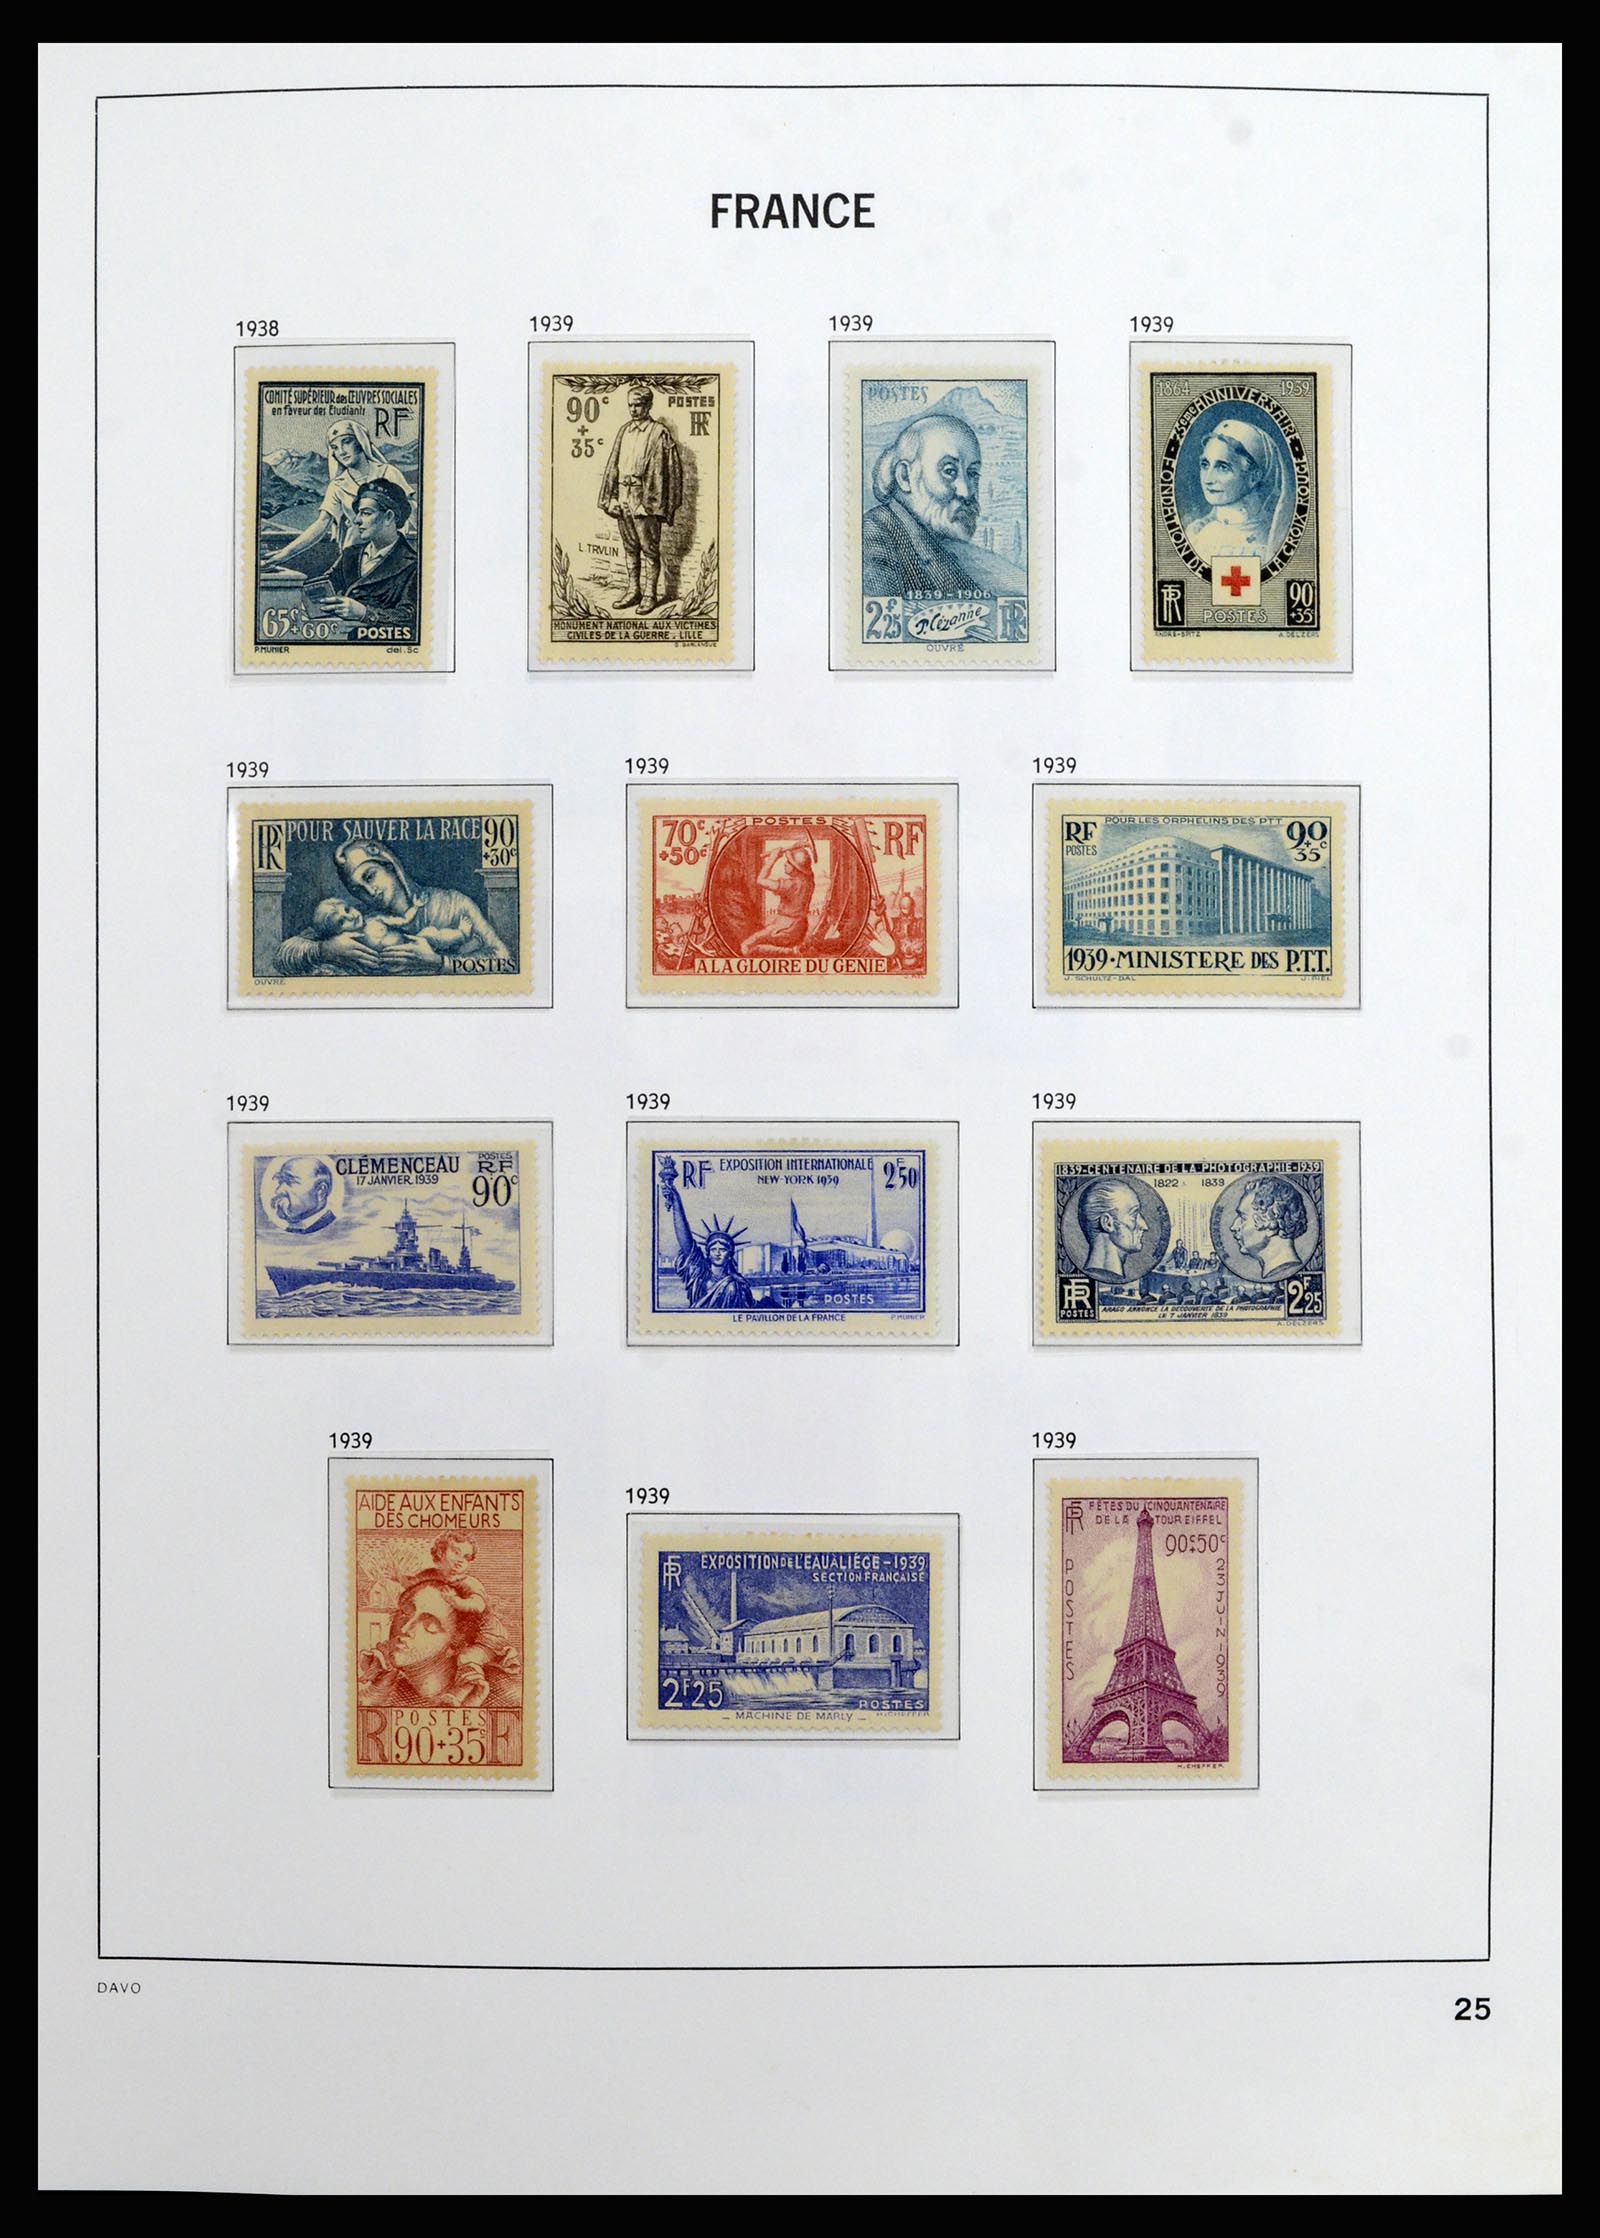 37089 024 - Stamp collection 37089 France 1863-2002.